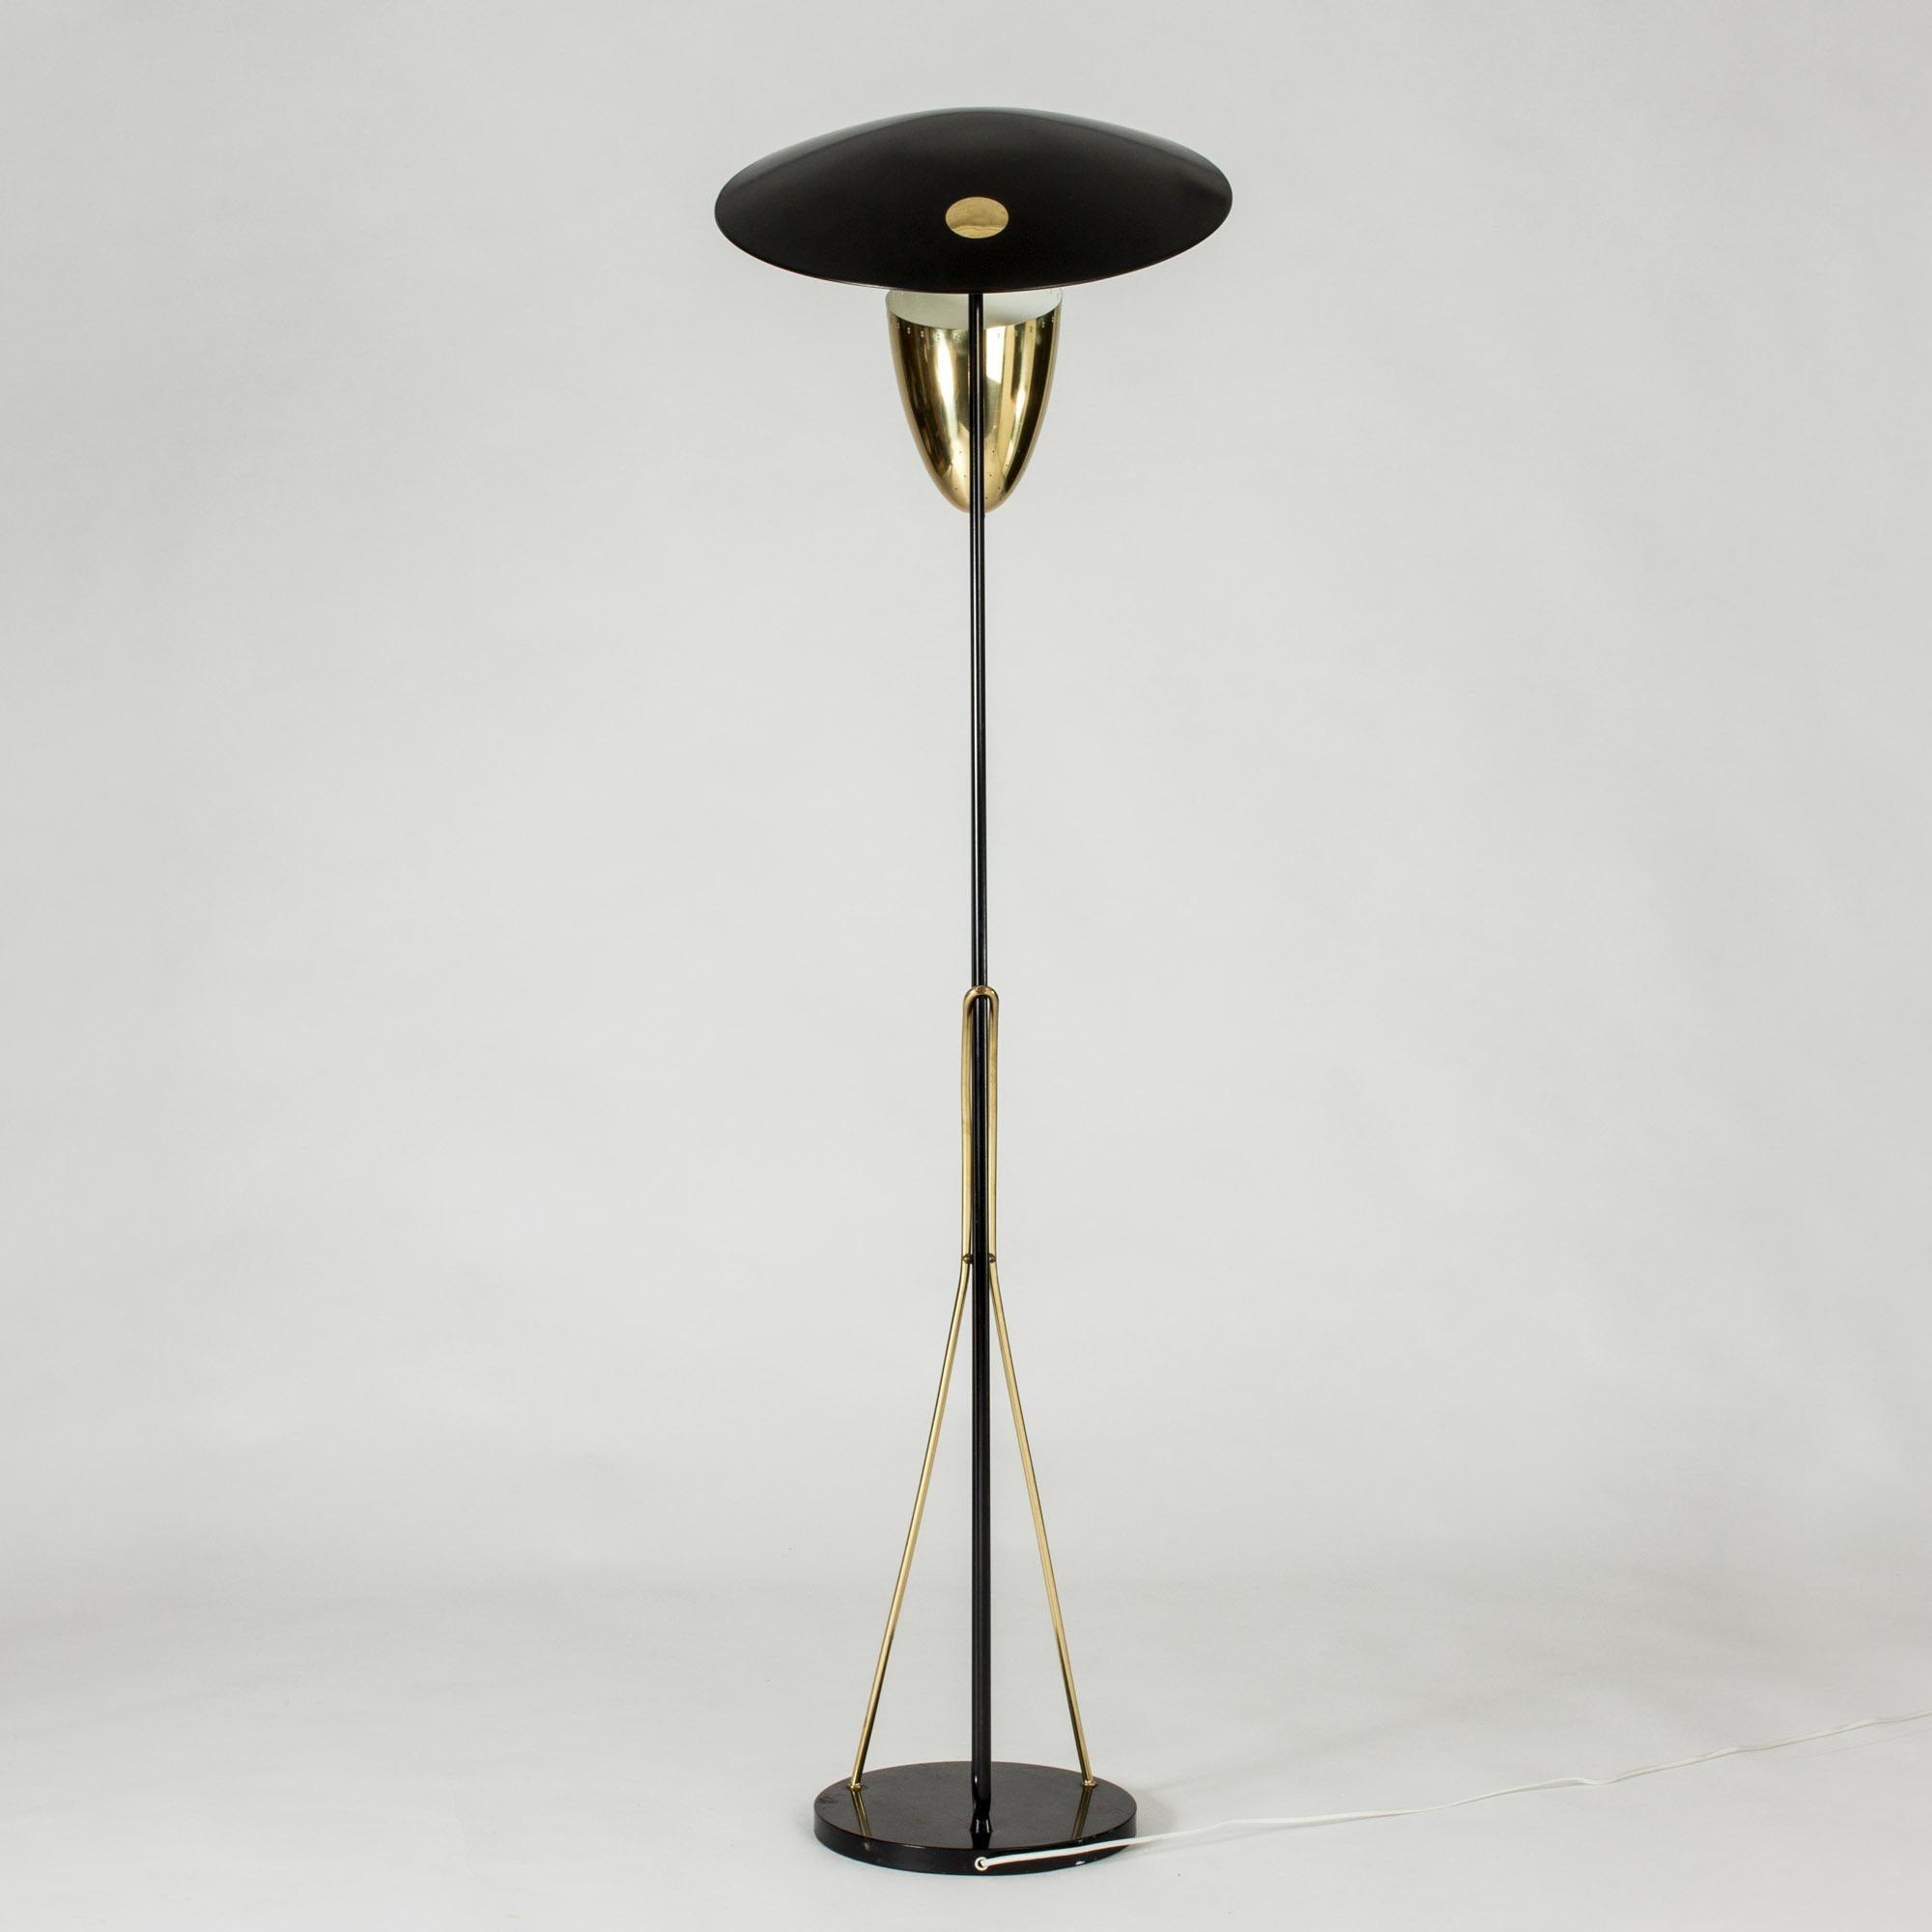 Danish Lacquered Metal and Brass Floor Lamp by Svend Aage Holm Sørensen, Denmark For Sale